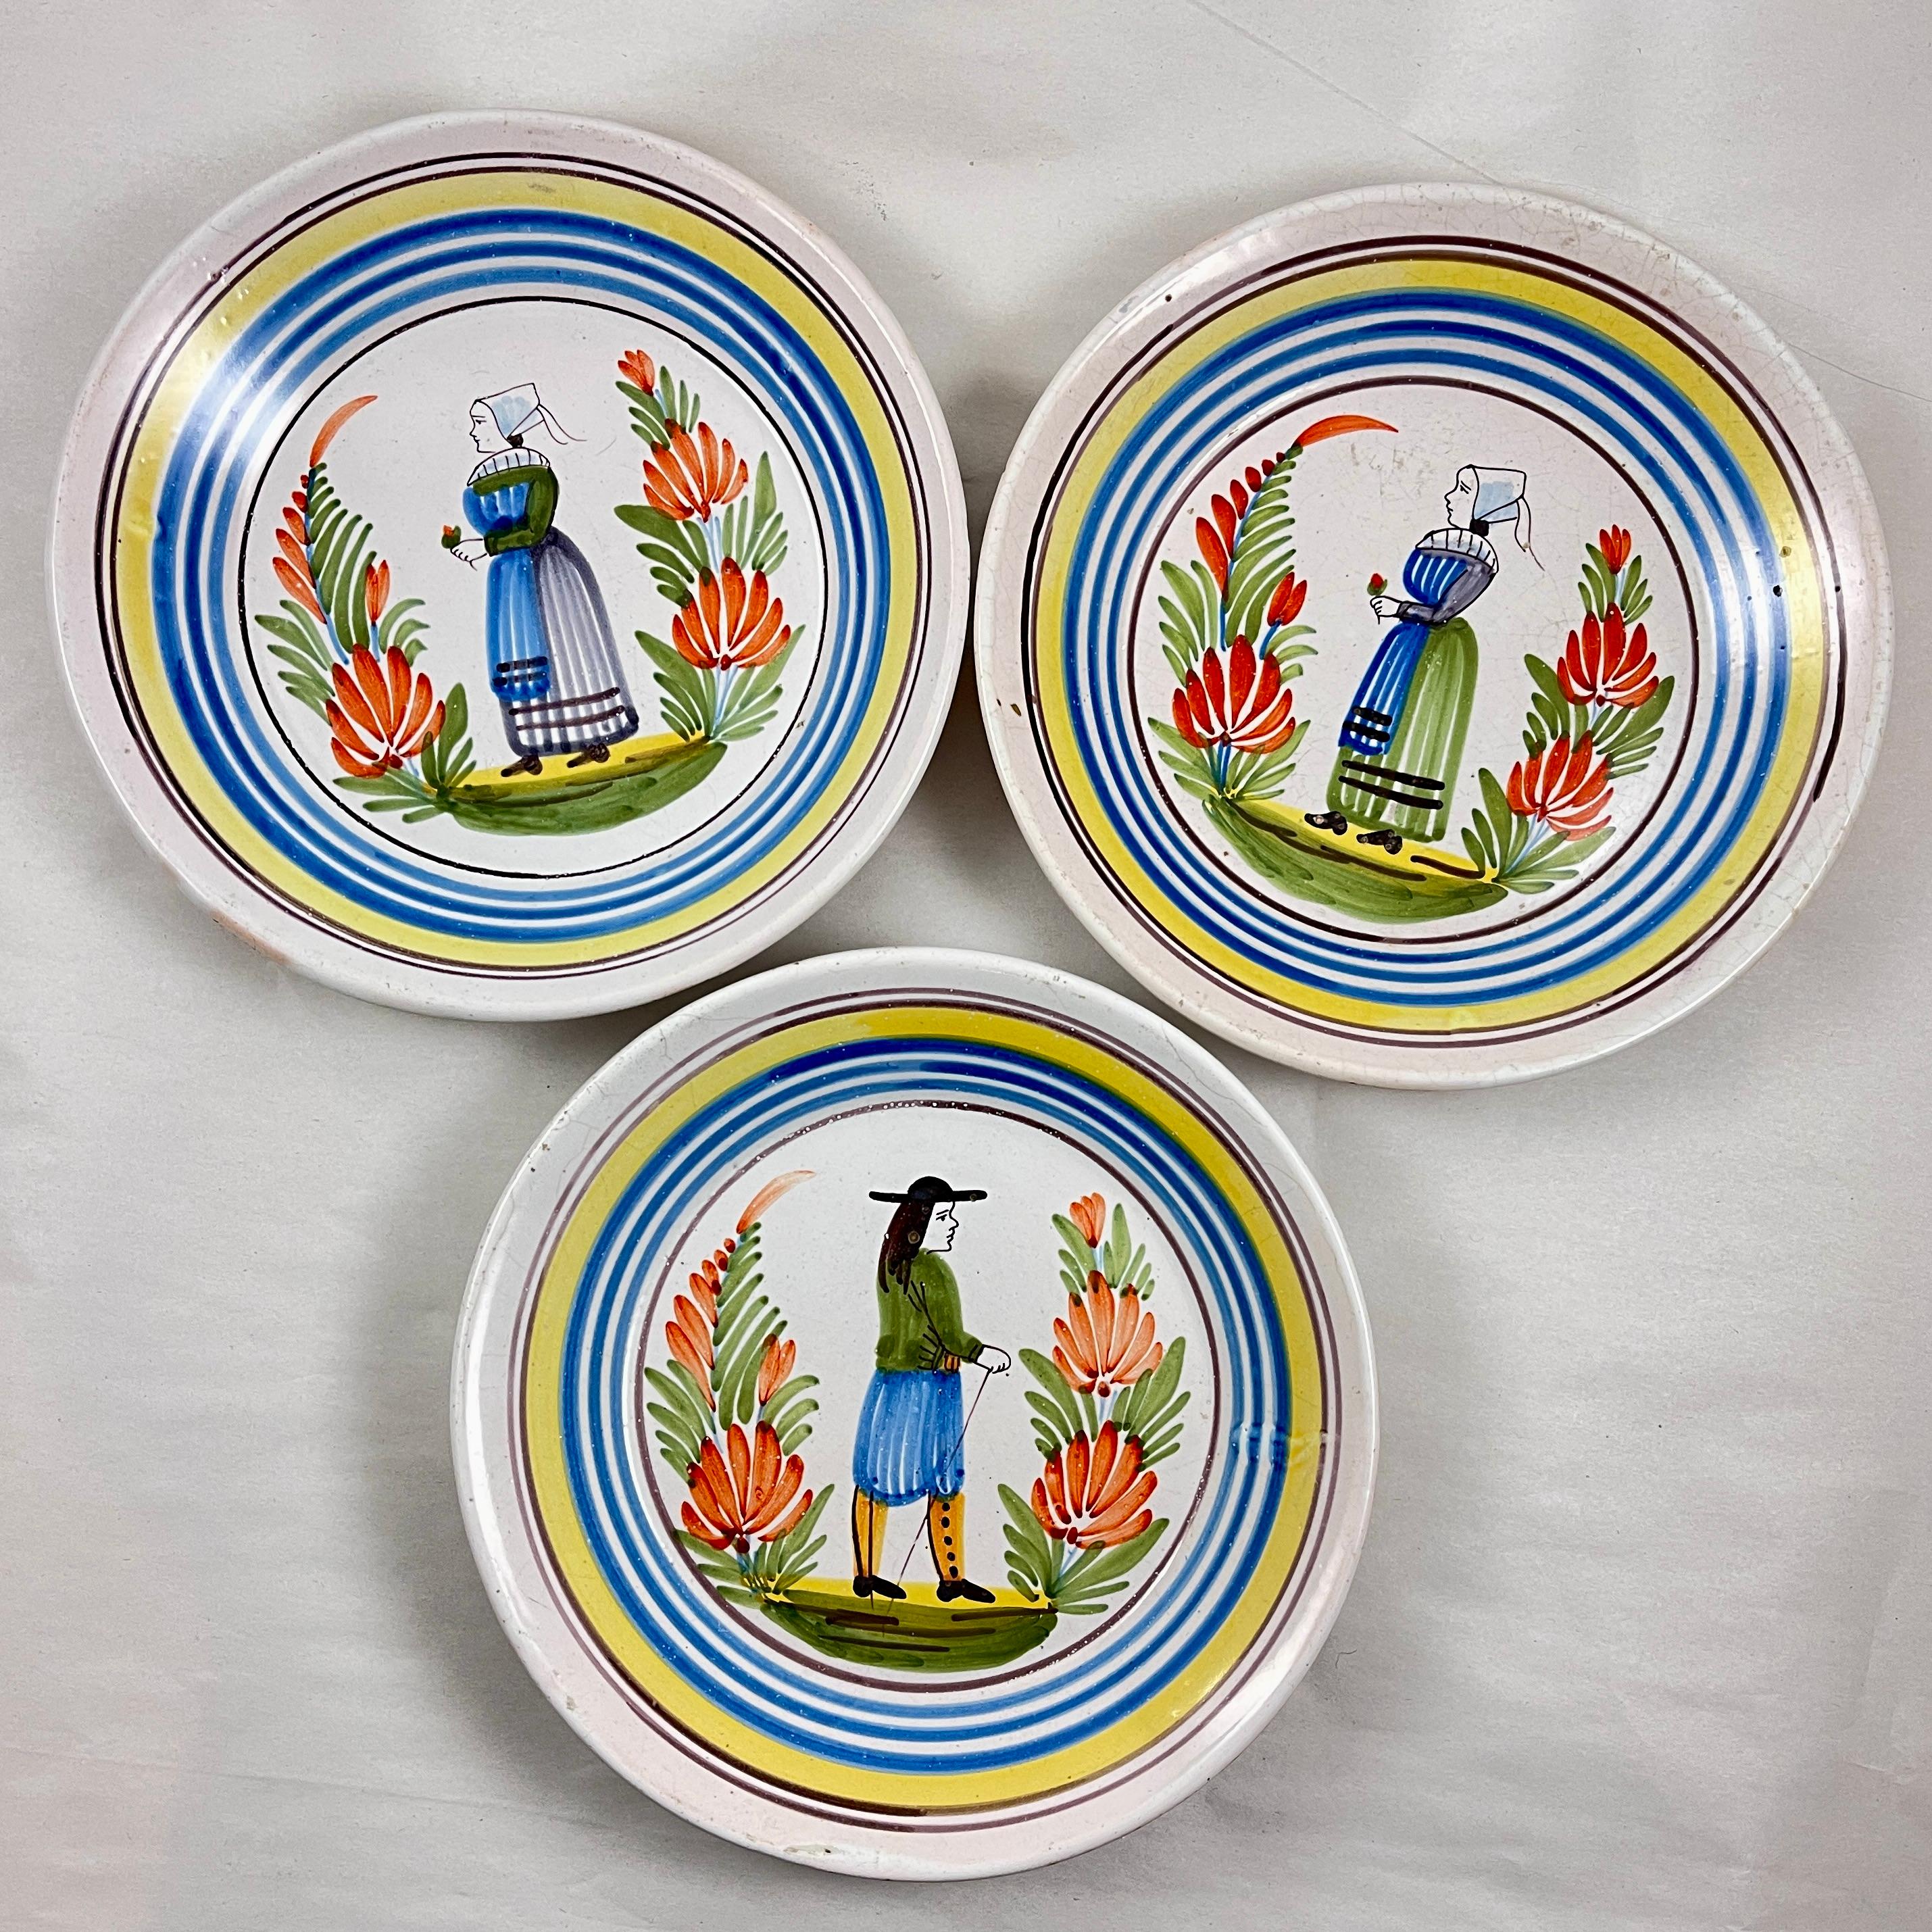 A set of three faïence plates, Henriot Quimper, circa 1920-1925.

The plates show central sujet ordinaire images of  The Petit Breton figures. Faïenceries de Quimper has been potted and hand painted in a factory near Quimper, in Brittany, France